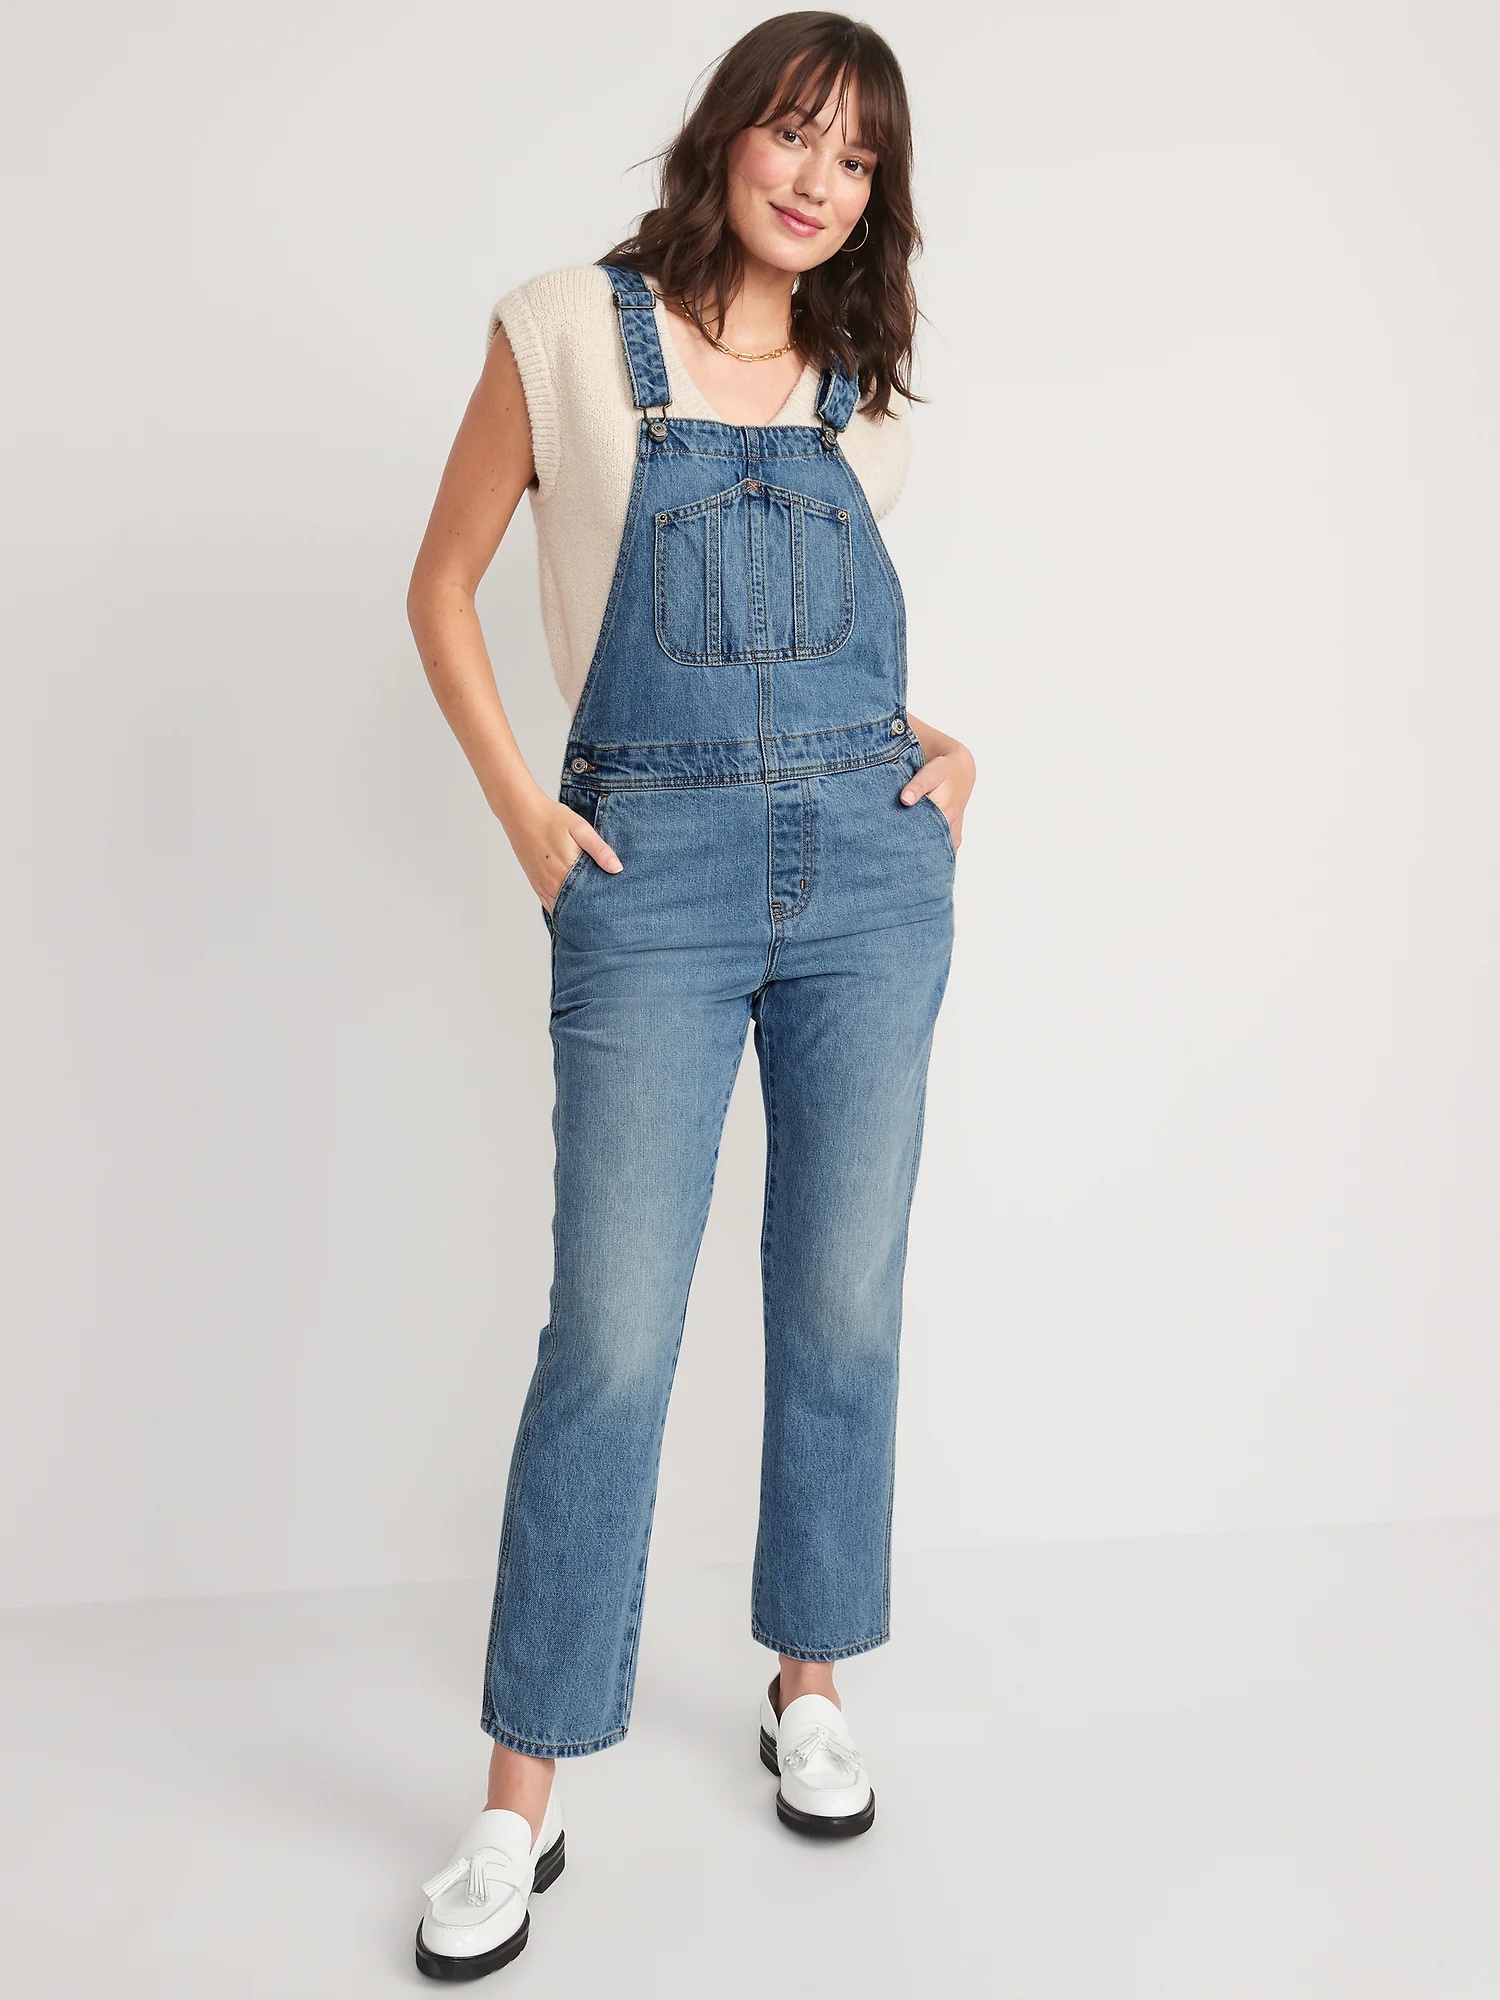  Womens Overalls Denim Straight Wide Leg Jeans Overall